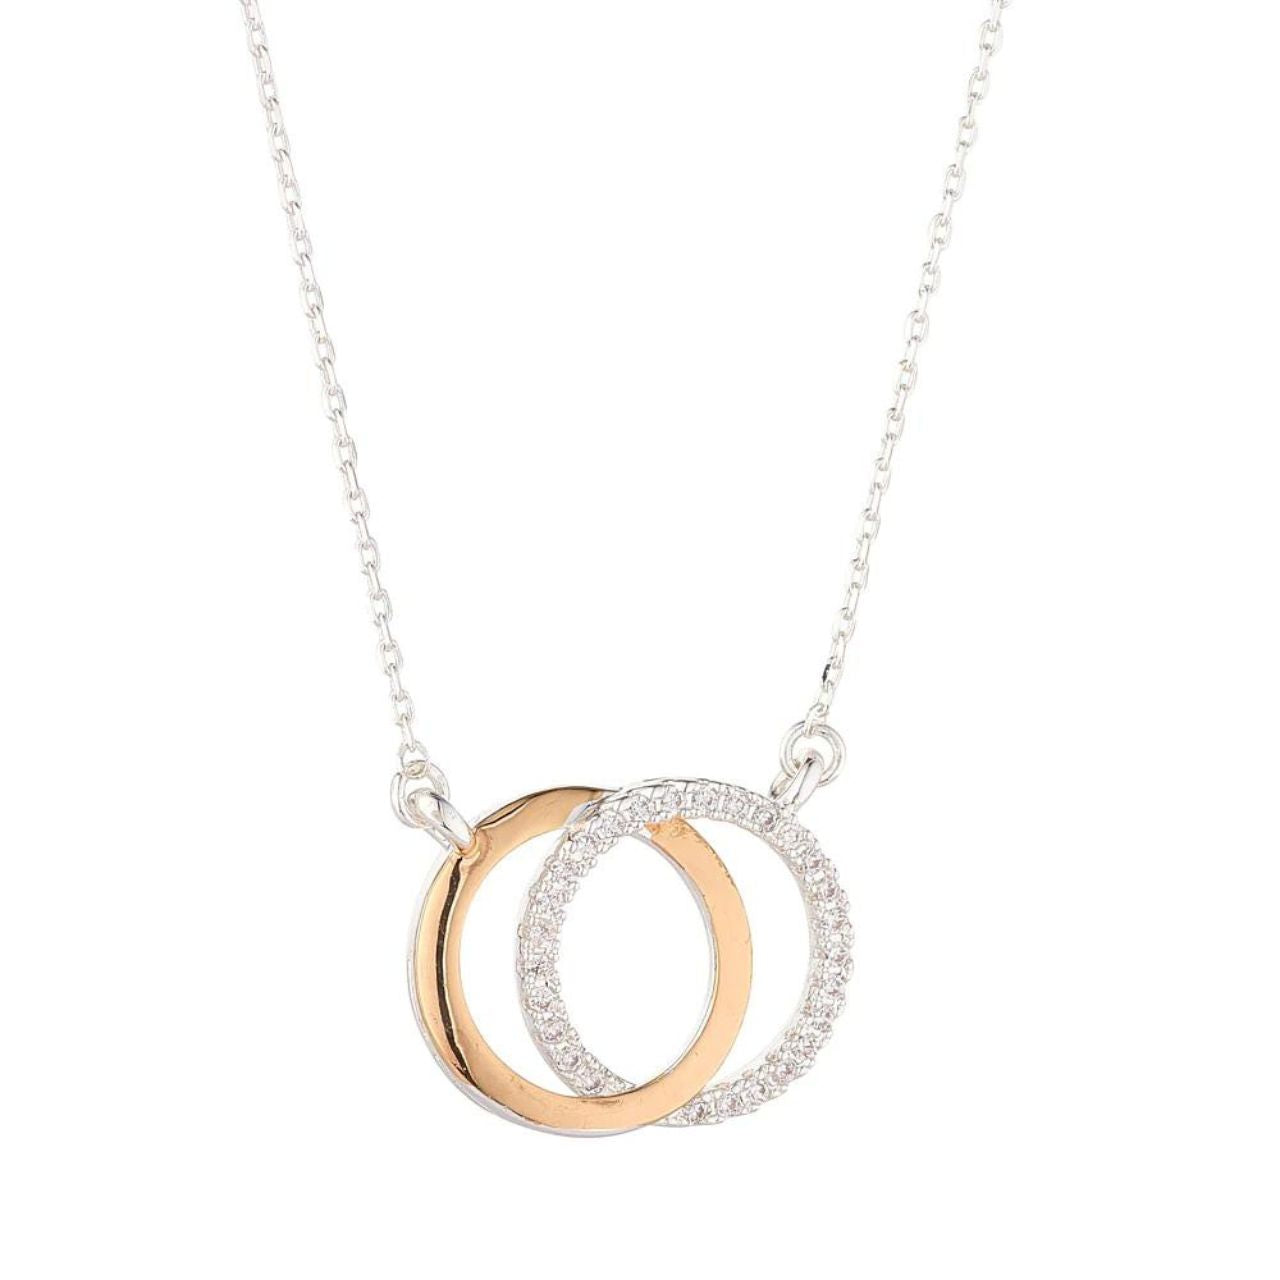 Silver & Gold Interlinking Circles Necklace Mixed Metal by Knight & Day  Silver & gold, interlinking circles necklace embellished with CZ stones in micro pavé setting.